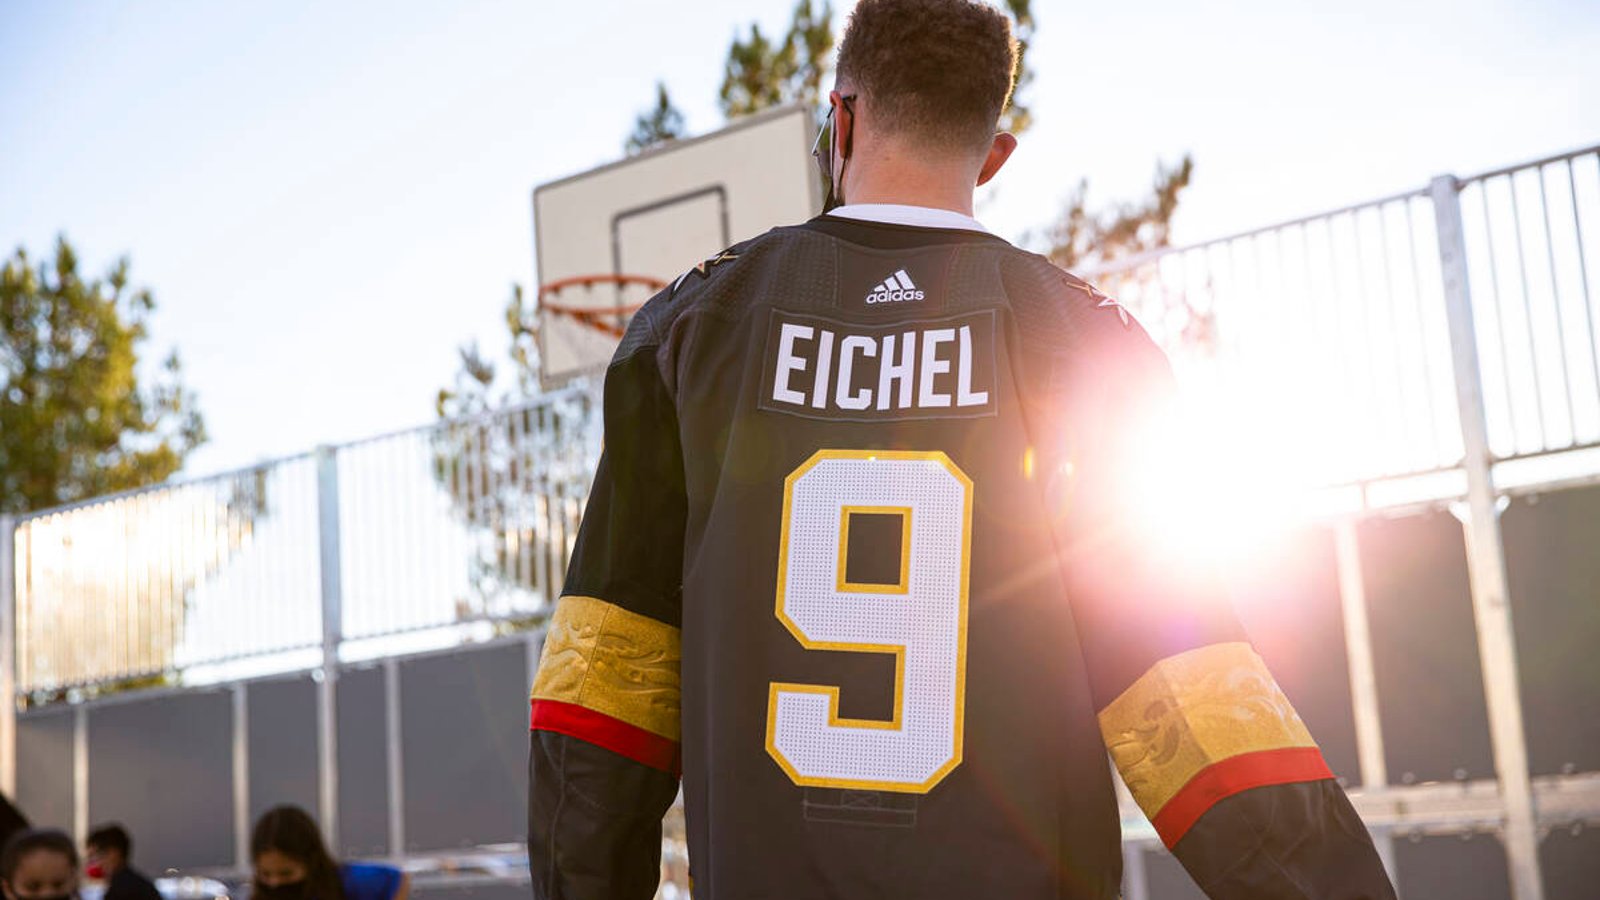 Latest update on Jack Eichel has fans shaking their heads